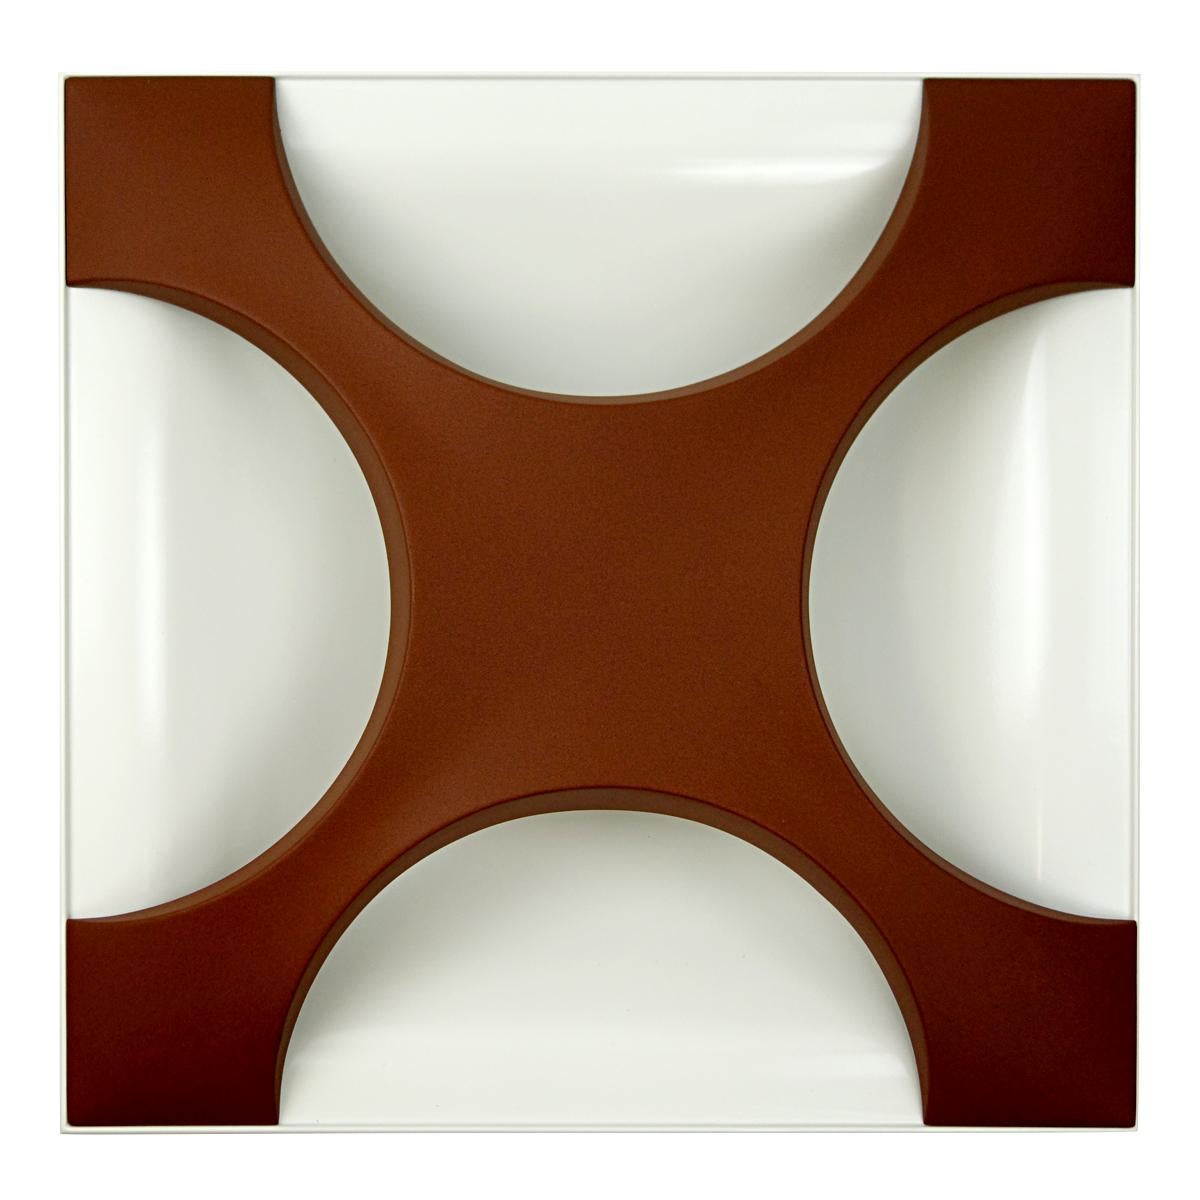 The Cross Oyster sconce was created in 1968 by German designer Rolf Krüger.
The base is made of white painted steel. The 4 lamps per sconces are hidden by an arch shaped piece of metal painted in matte bronze.
These lights are wall sculptures in